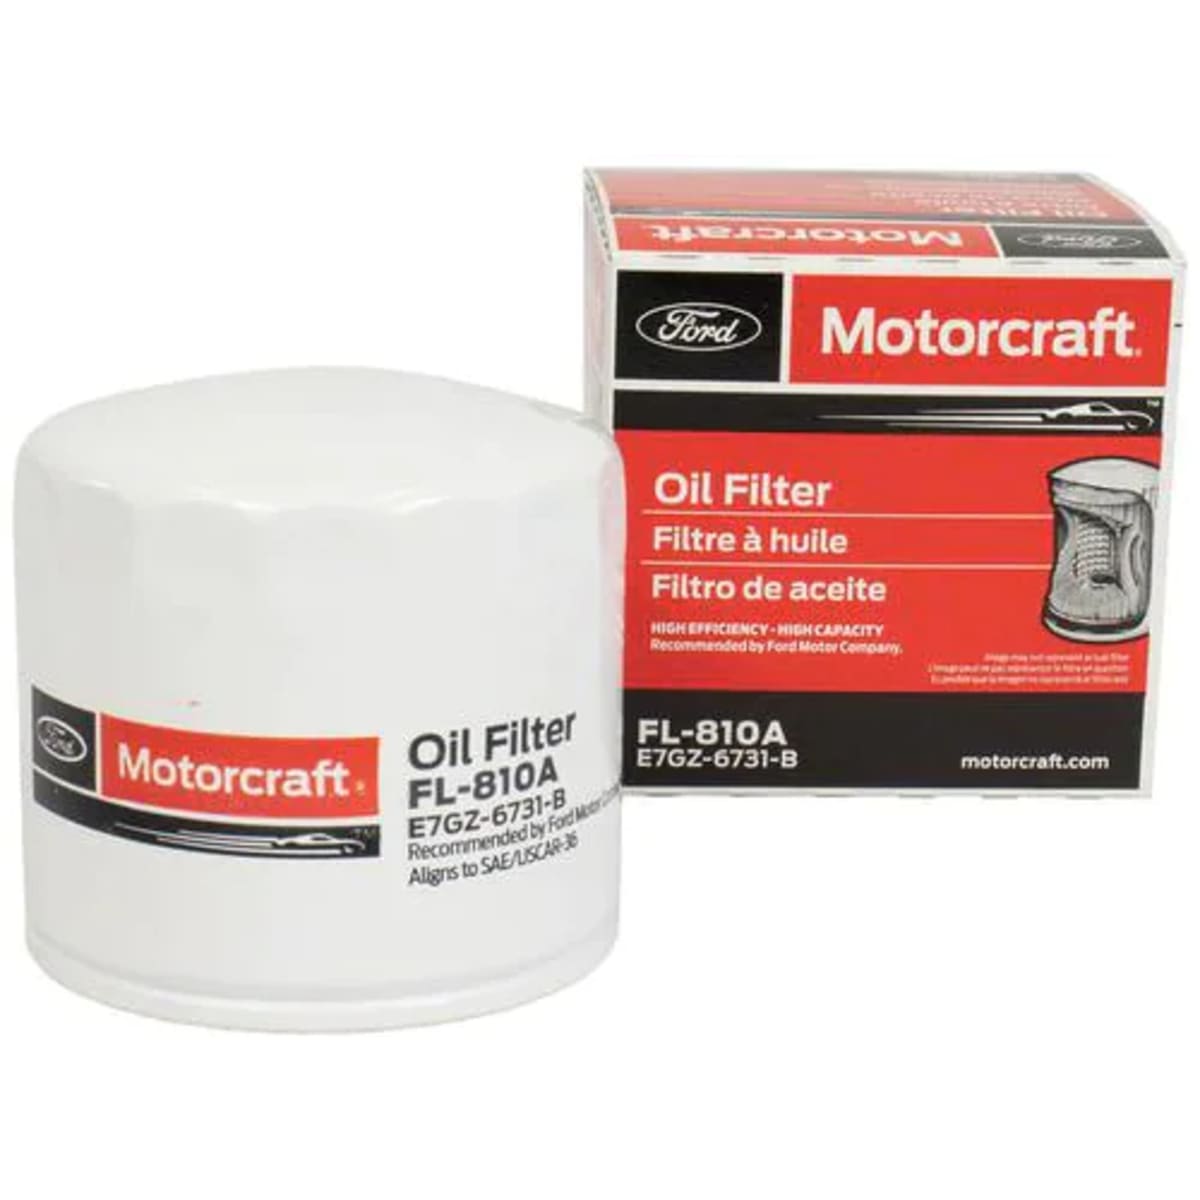 2020 Kia Sportage Oil Filter Spinon, Direct Fit, Sold individually